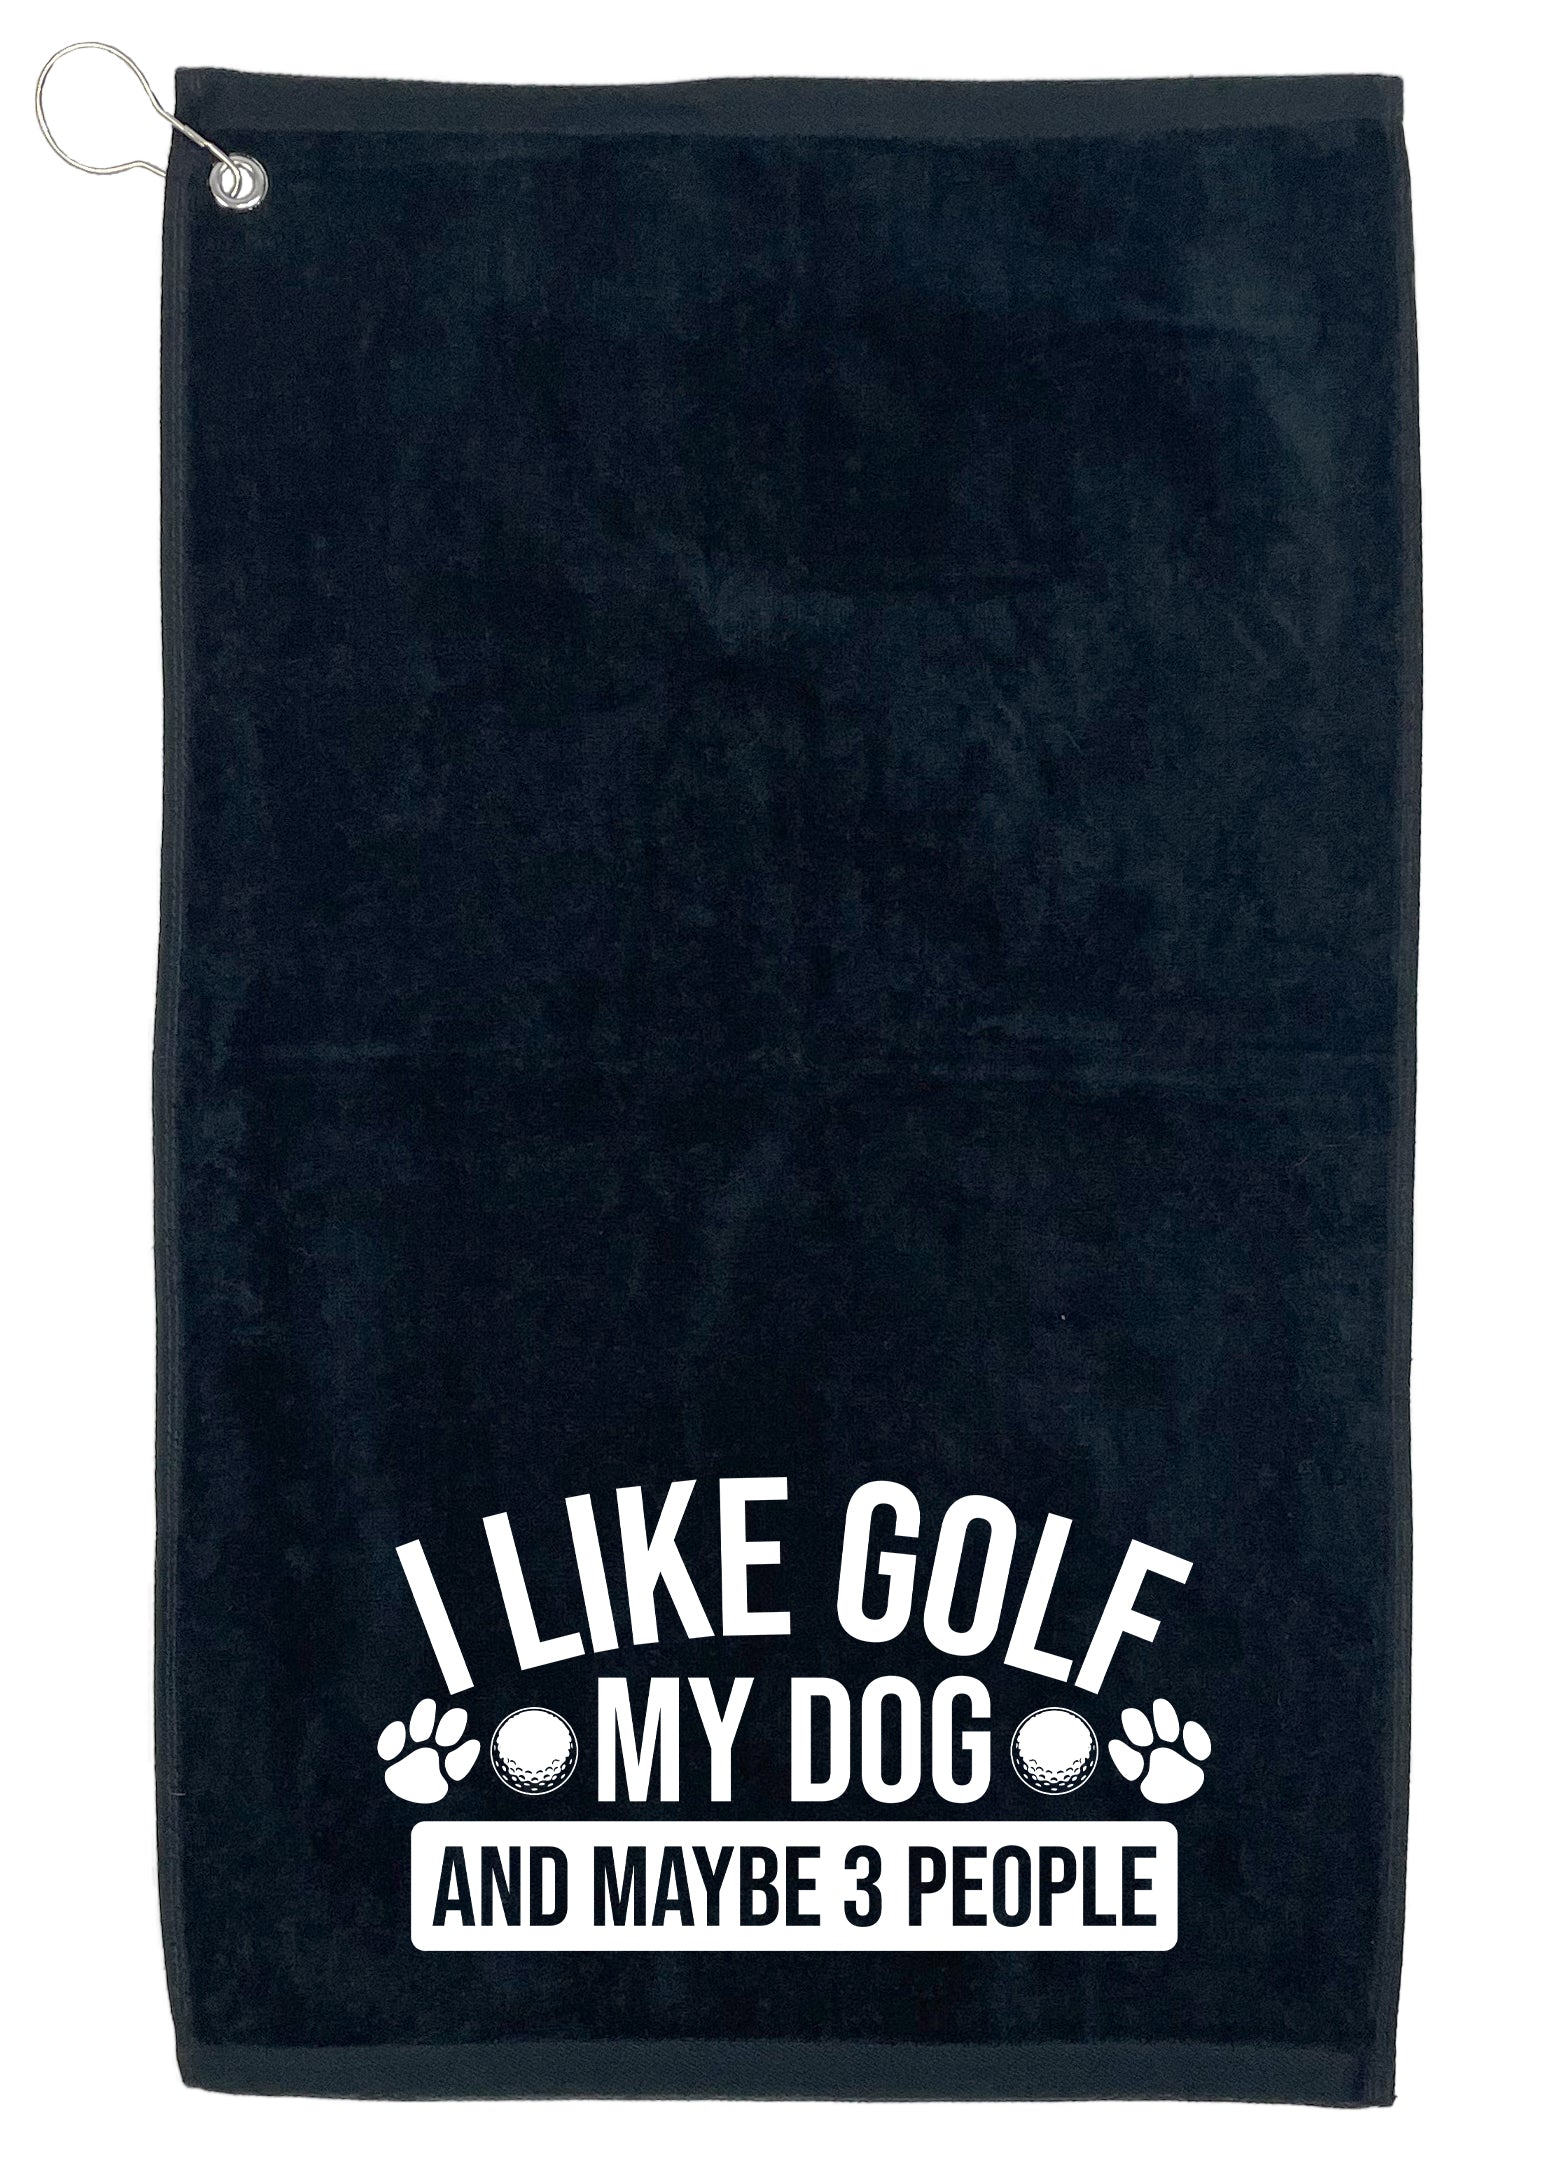 I Love Golf, My Dog And Maybe 3 People, Golf Towel - Funny T Shirts & Graphic Tees